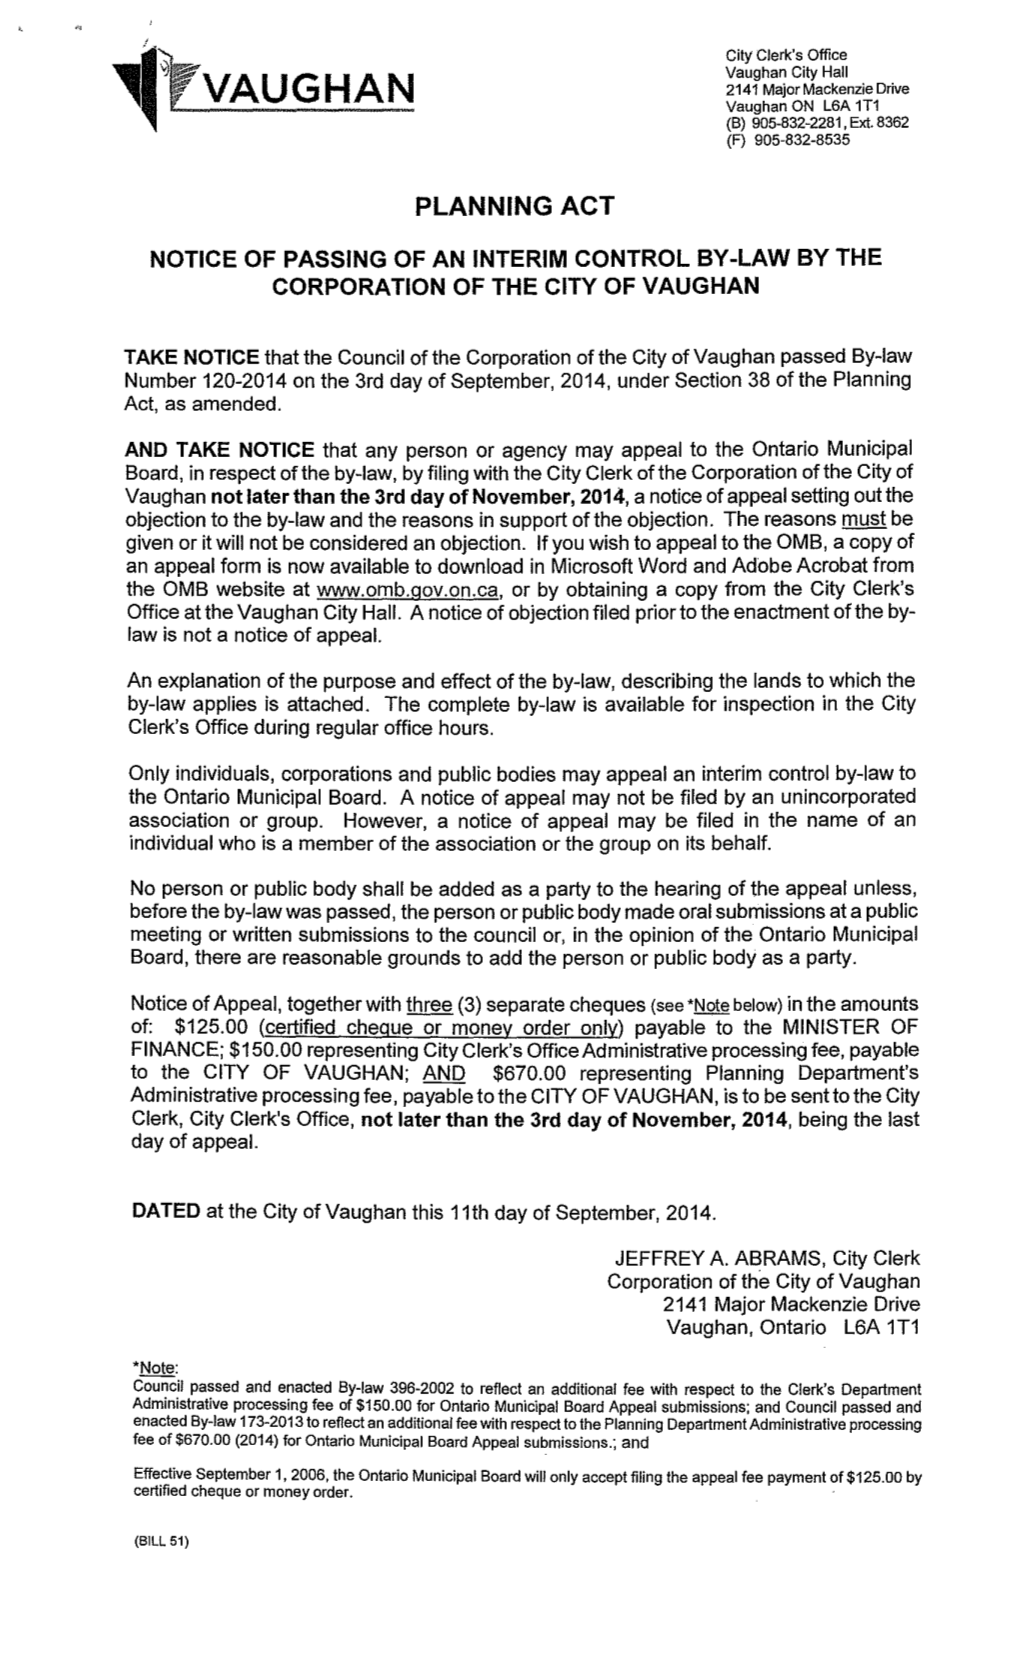 Notice of Passing of Interim Control By-Law 120-2014